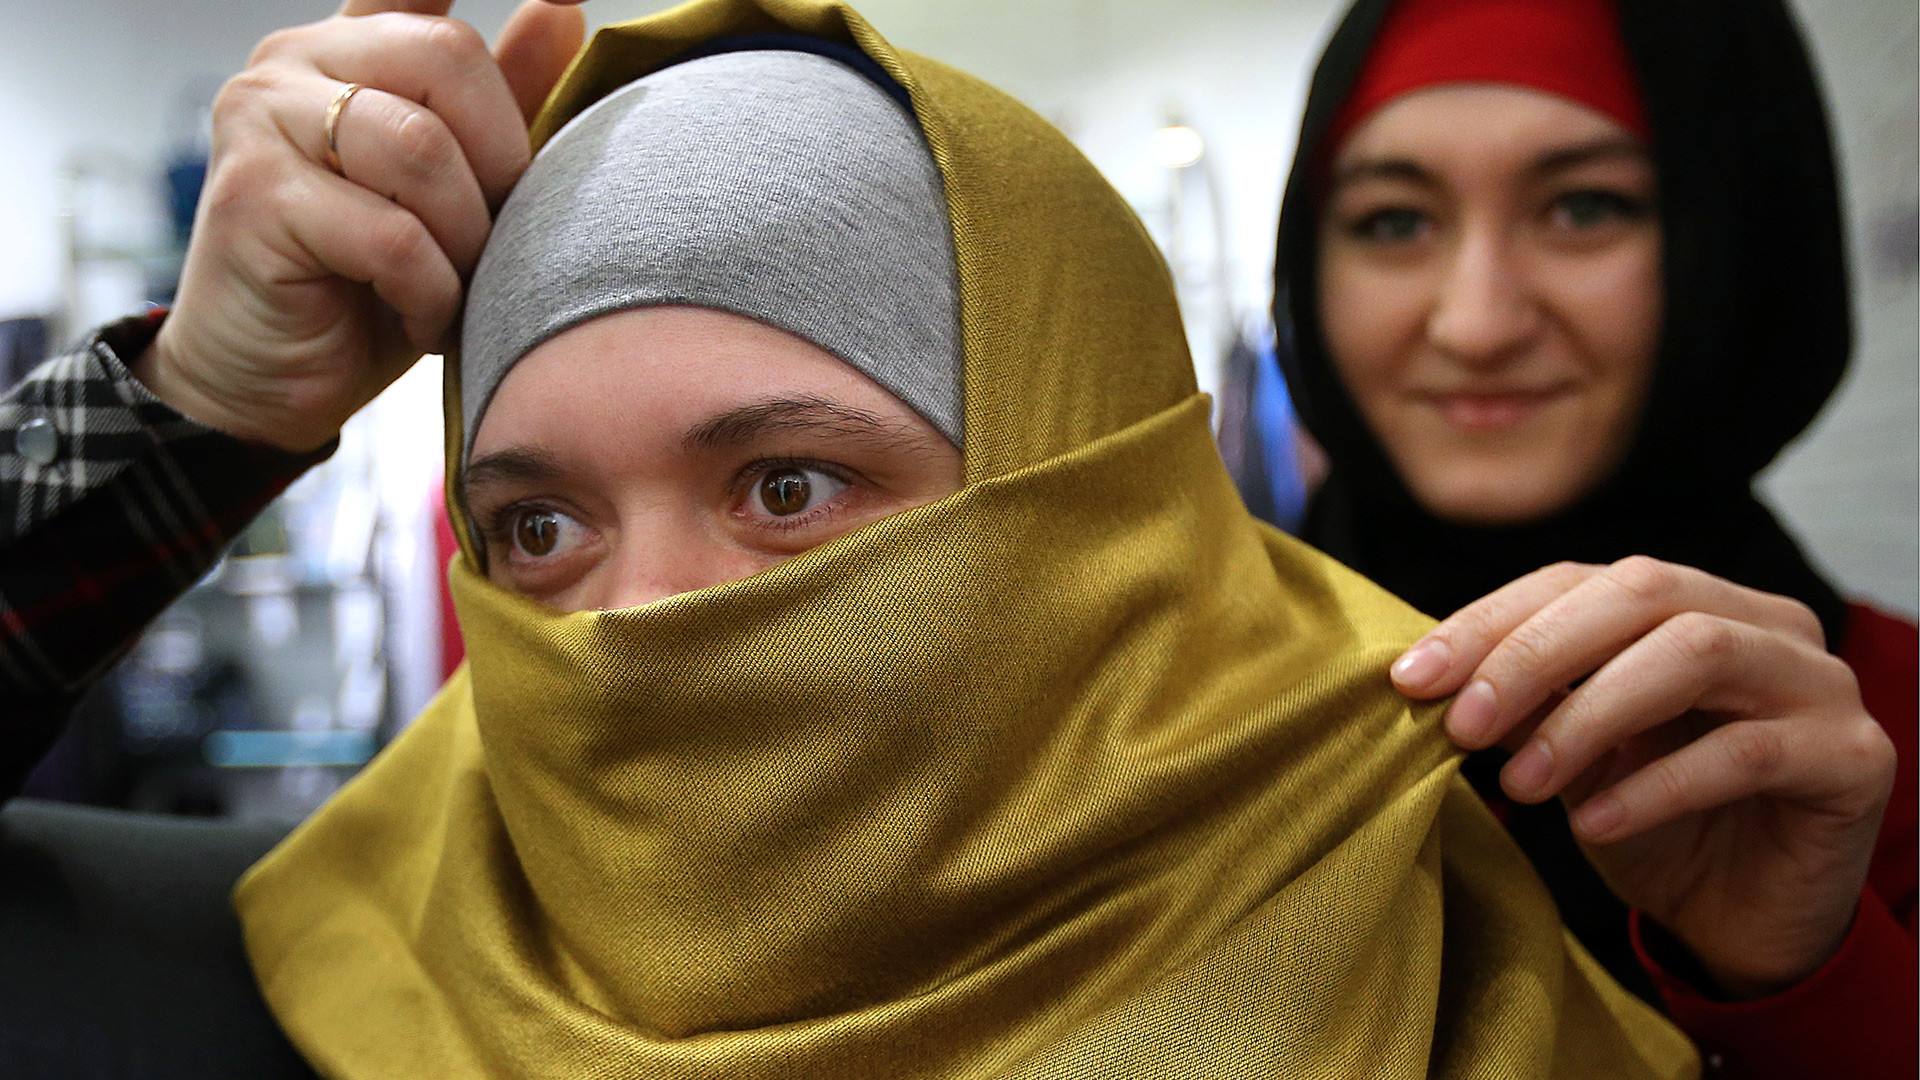 A woman chooses a hijab in a Moscow shopping center.